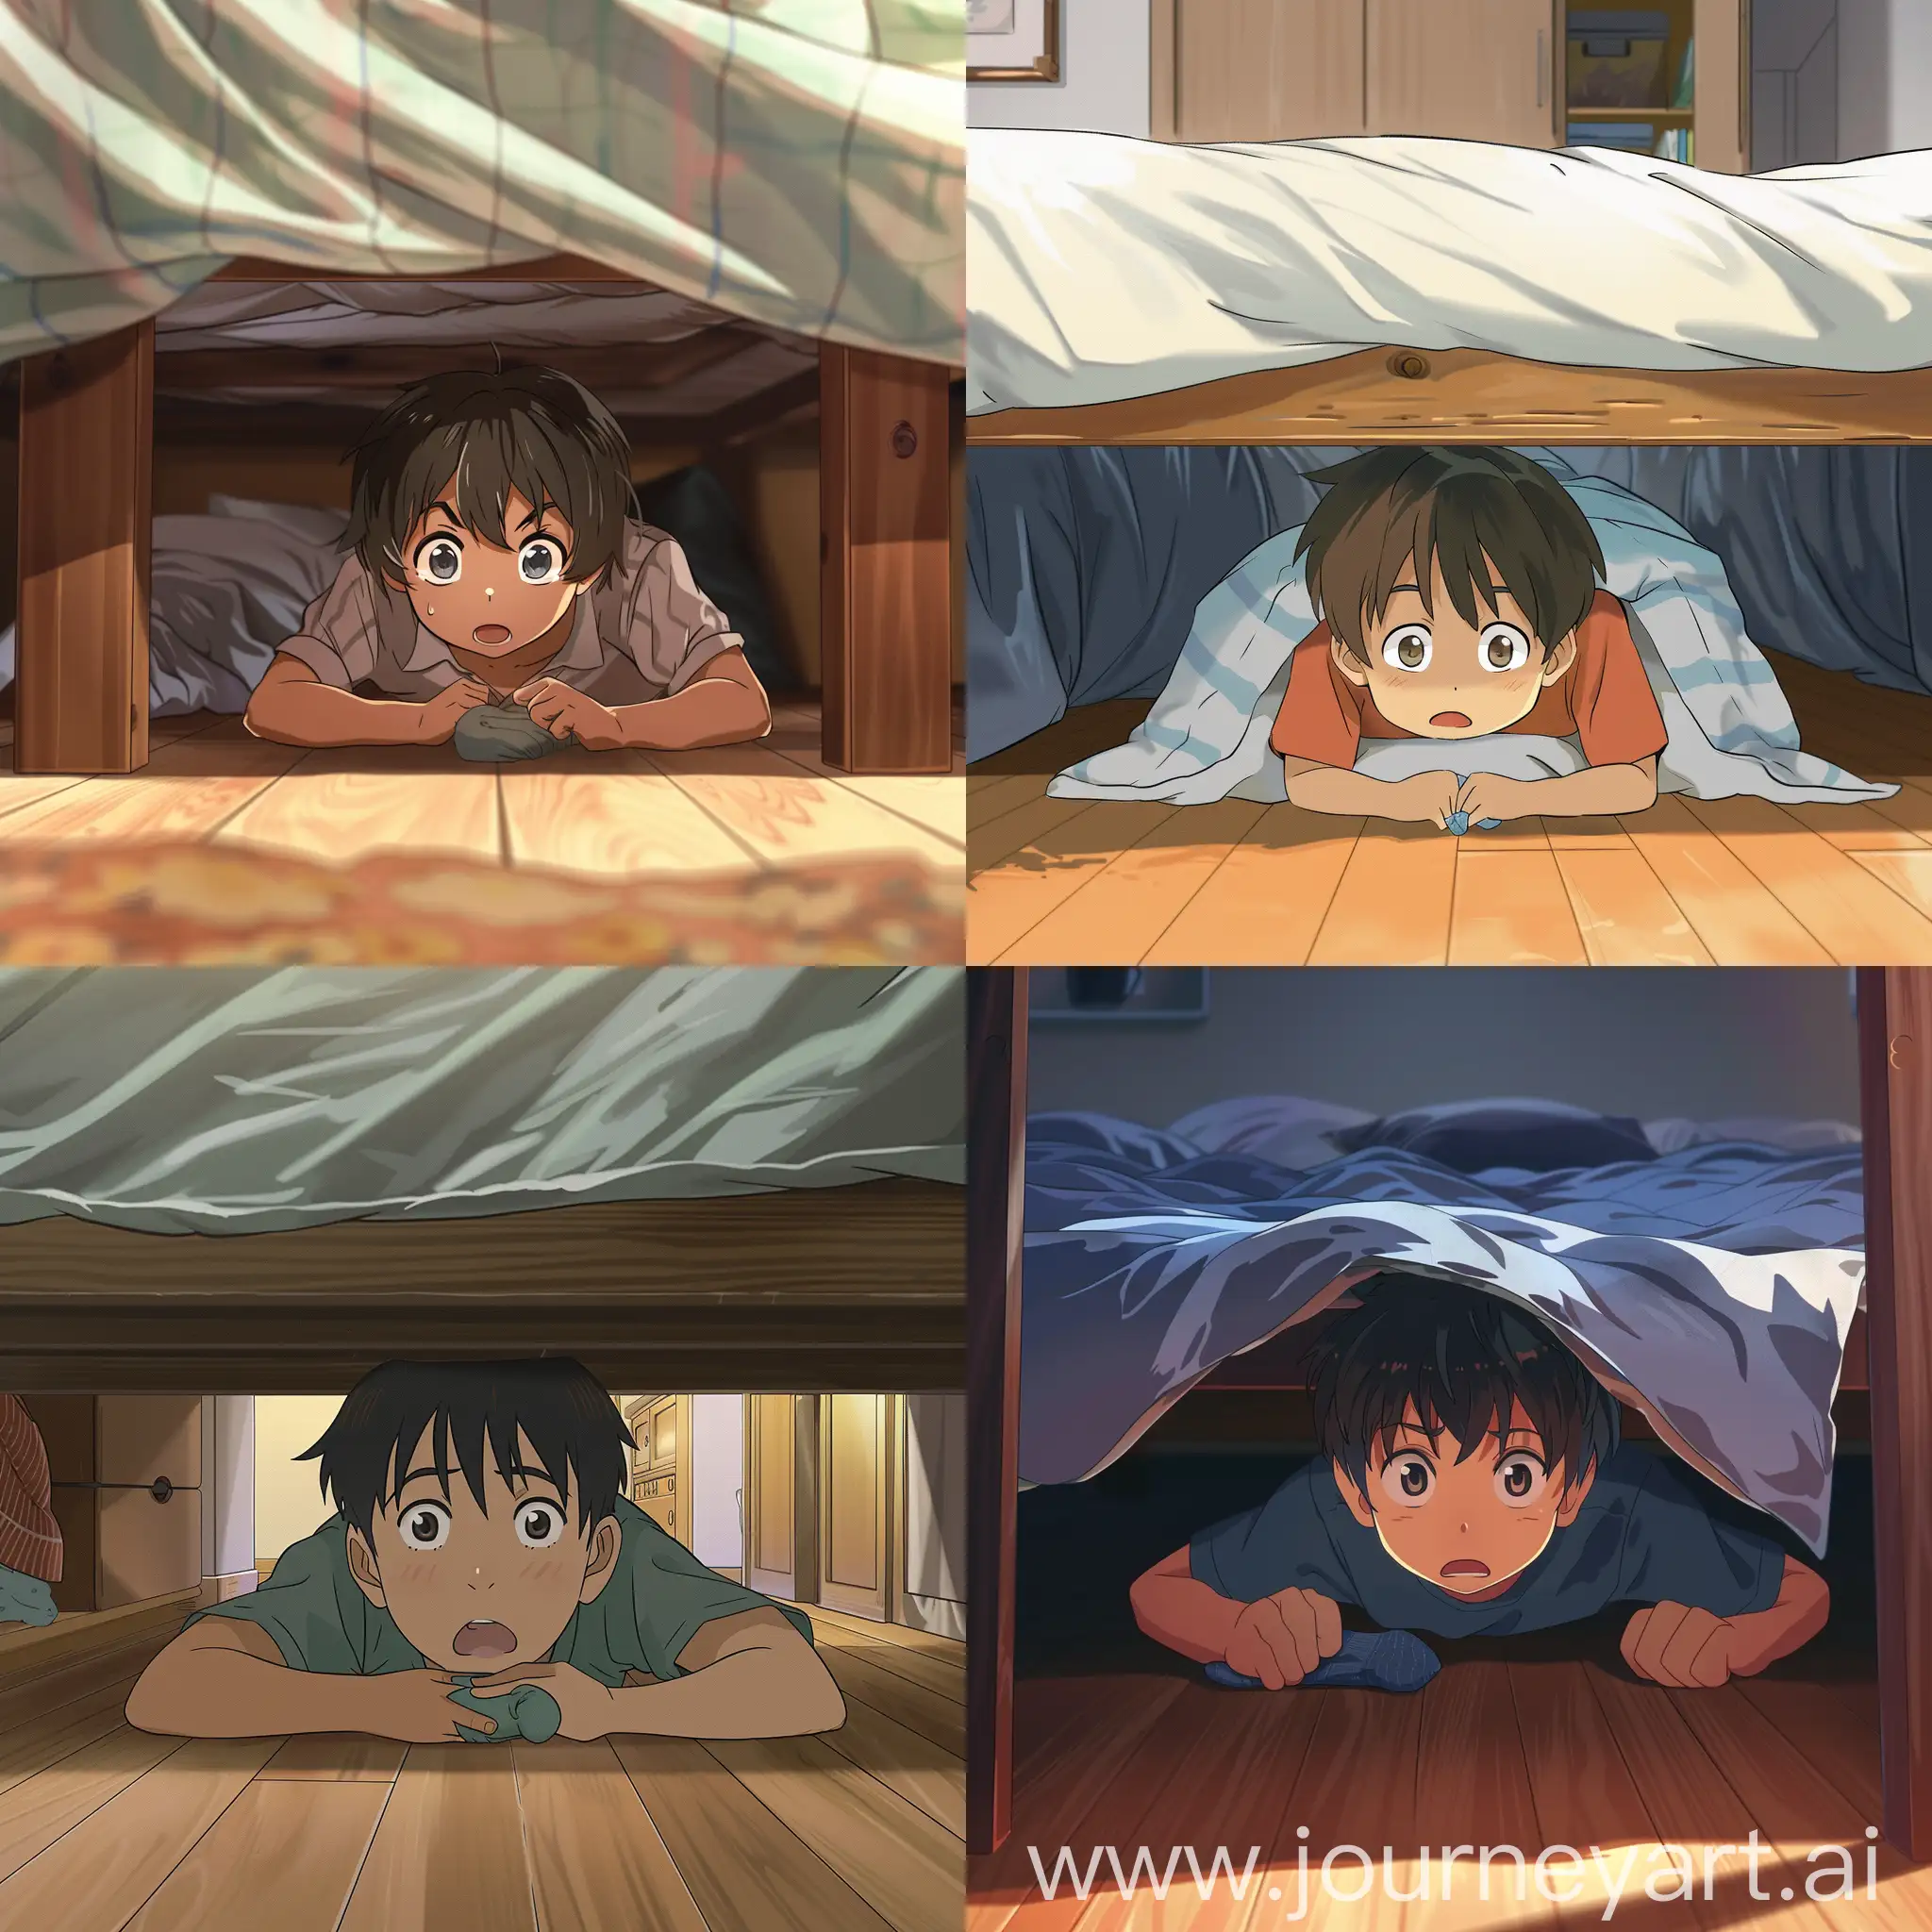 Boy-Searching-for-Sock-Under-Bed-in-Anime-Style-View